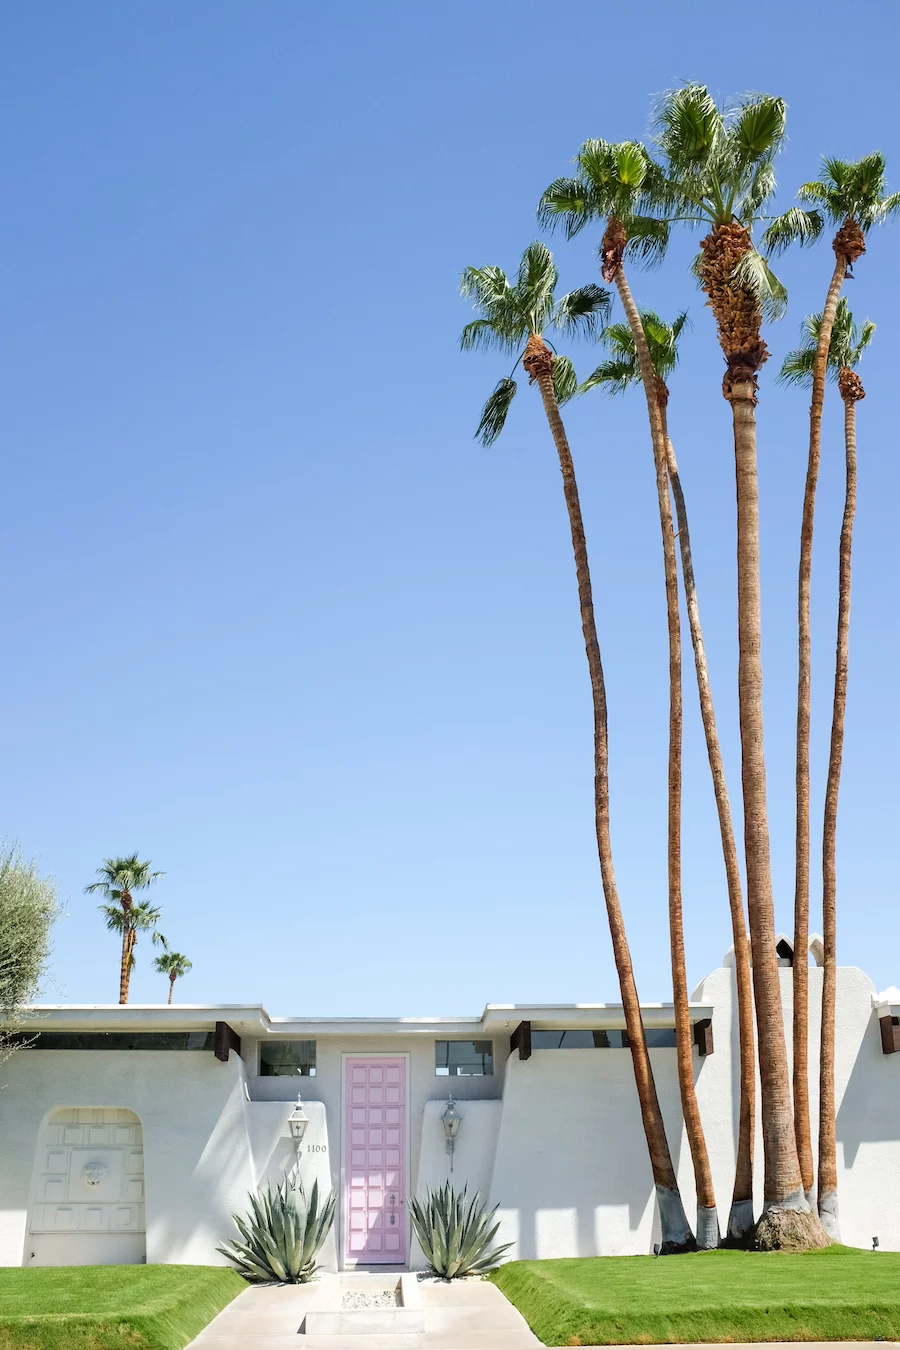 Take a Palm Springs Door Tour to see all the bright & colorful midcentury modern front doors, Instagram Photos, Insta-worthy, Driving Tour, Architecture Tour, Weekend Trip, Palm Springs Guide, Travel Guide, What to do in Palm Springs, Walking Door, Photo Tour, That Pink Door Address, Salty Canary 